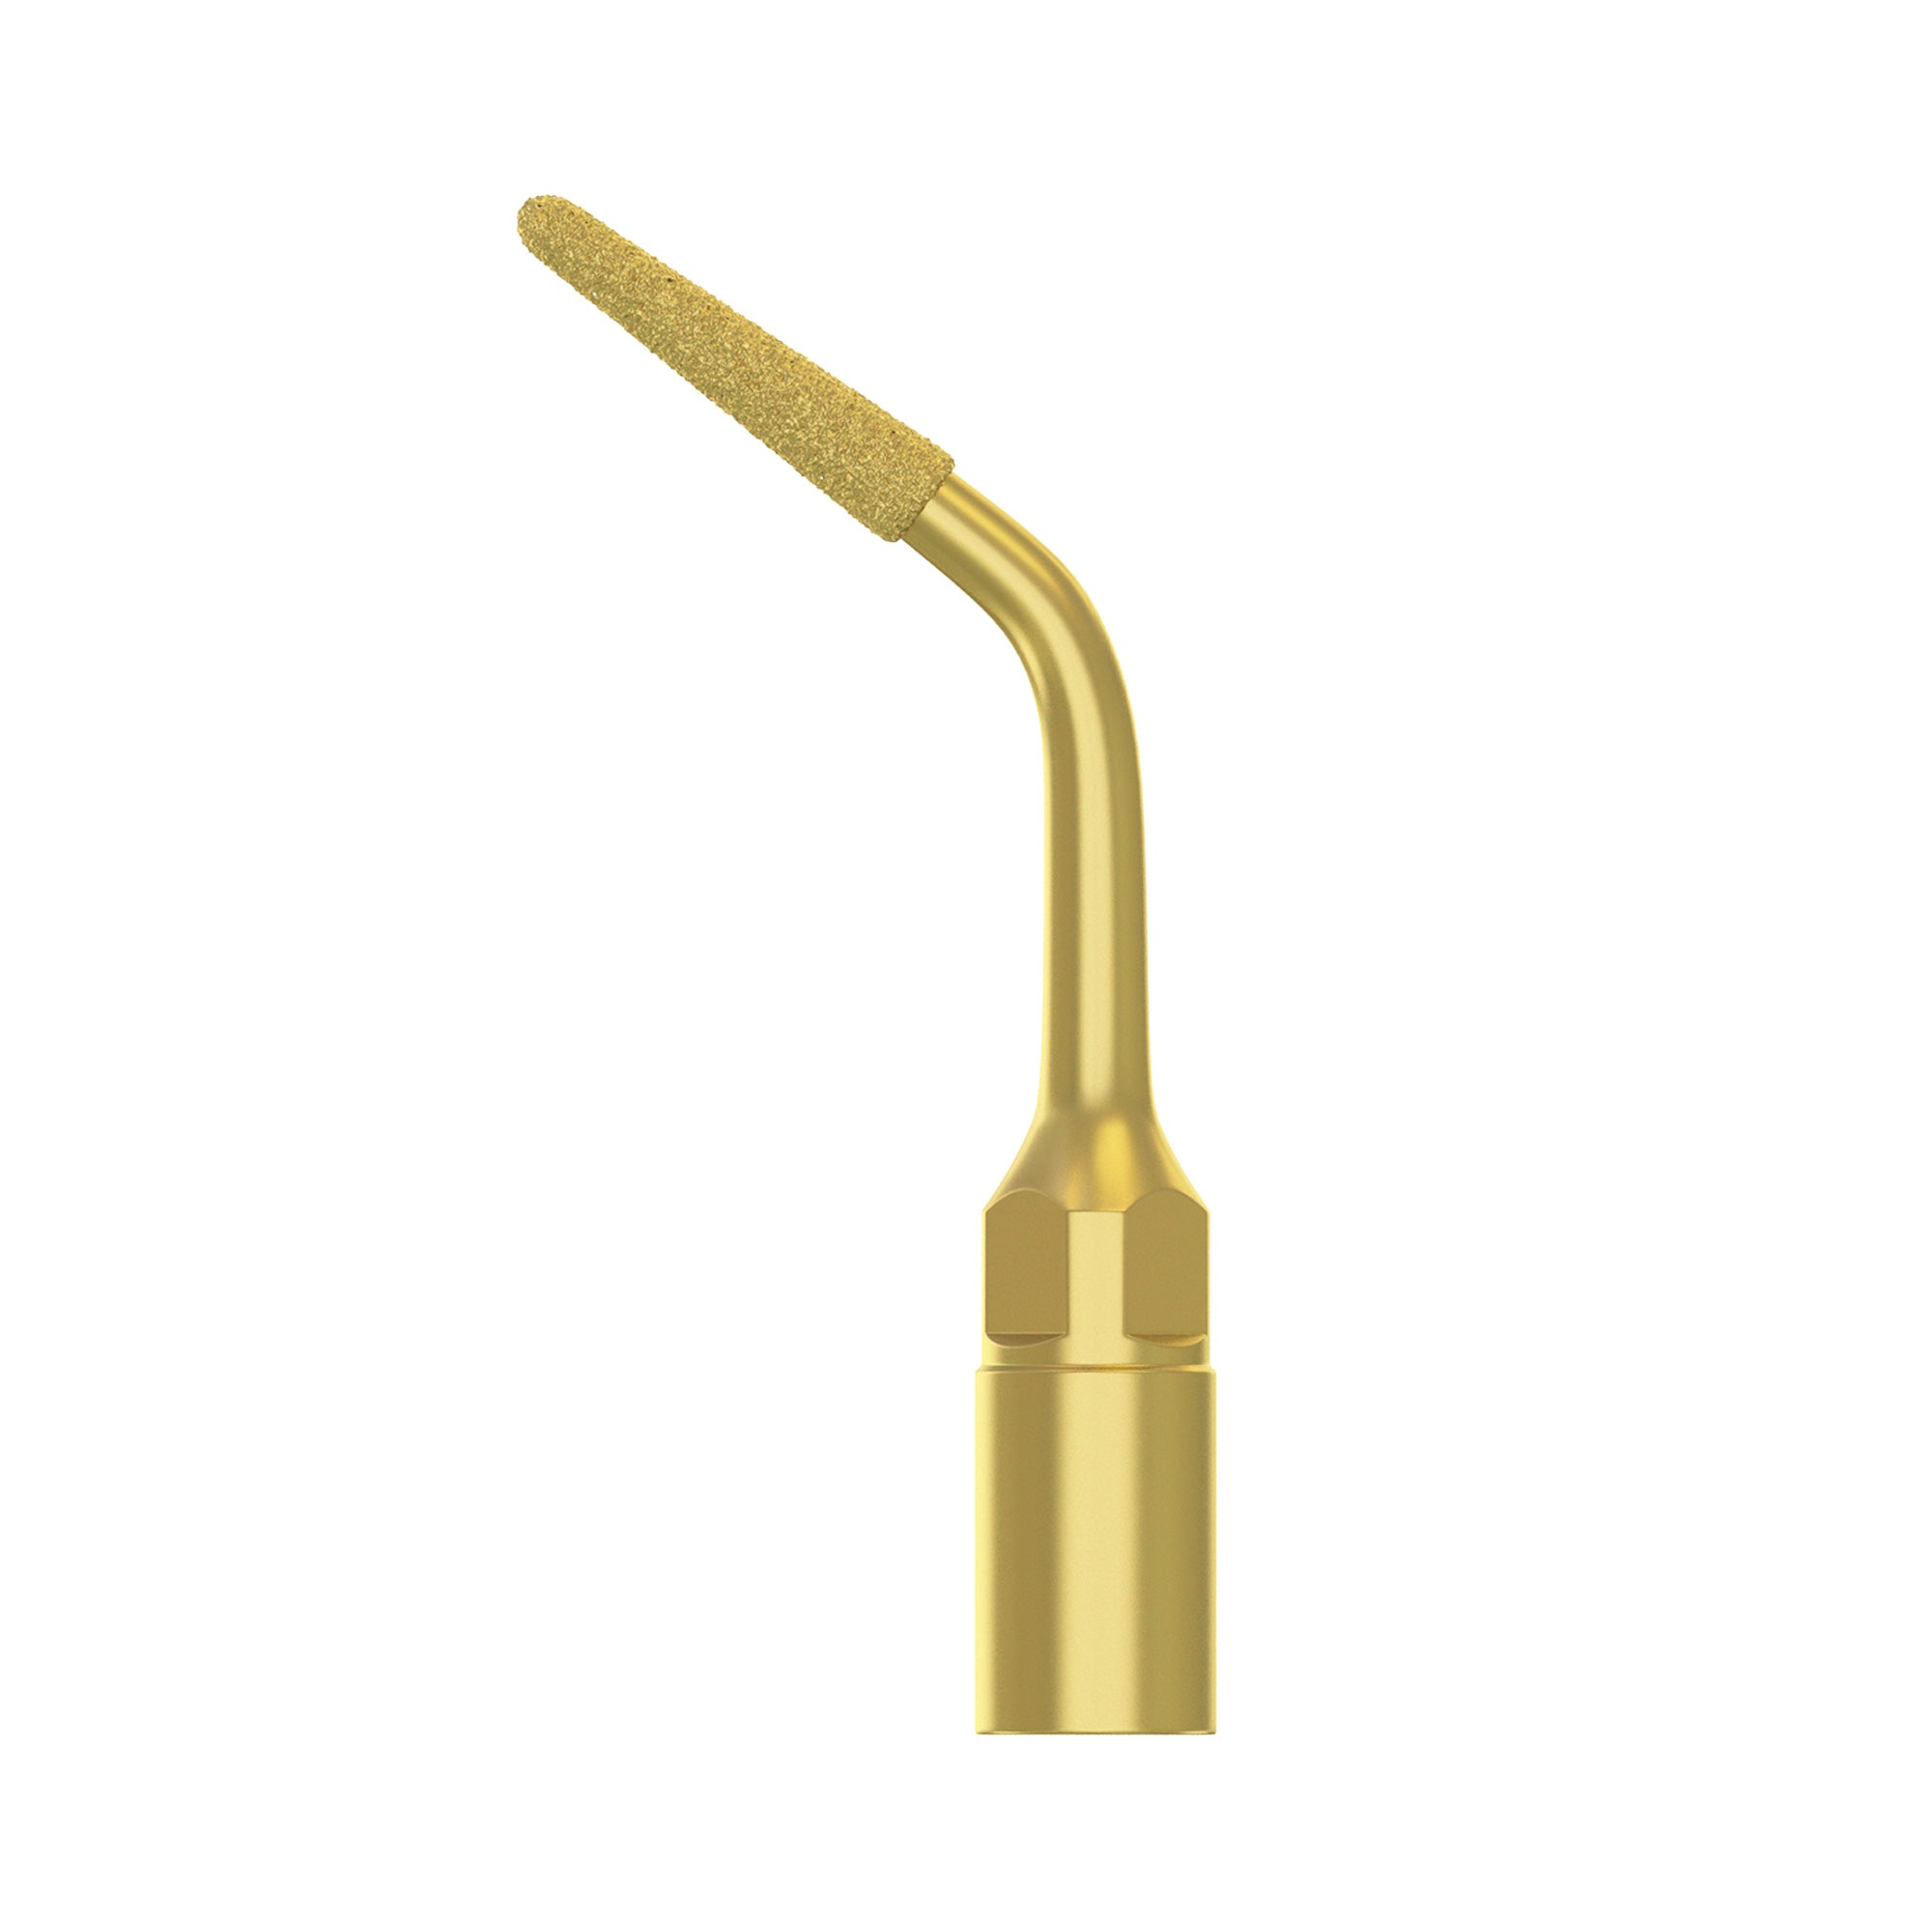 Mariotti Piezoelectric Surgical Tip UP6